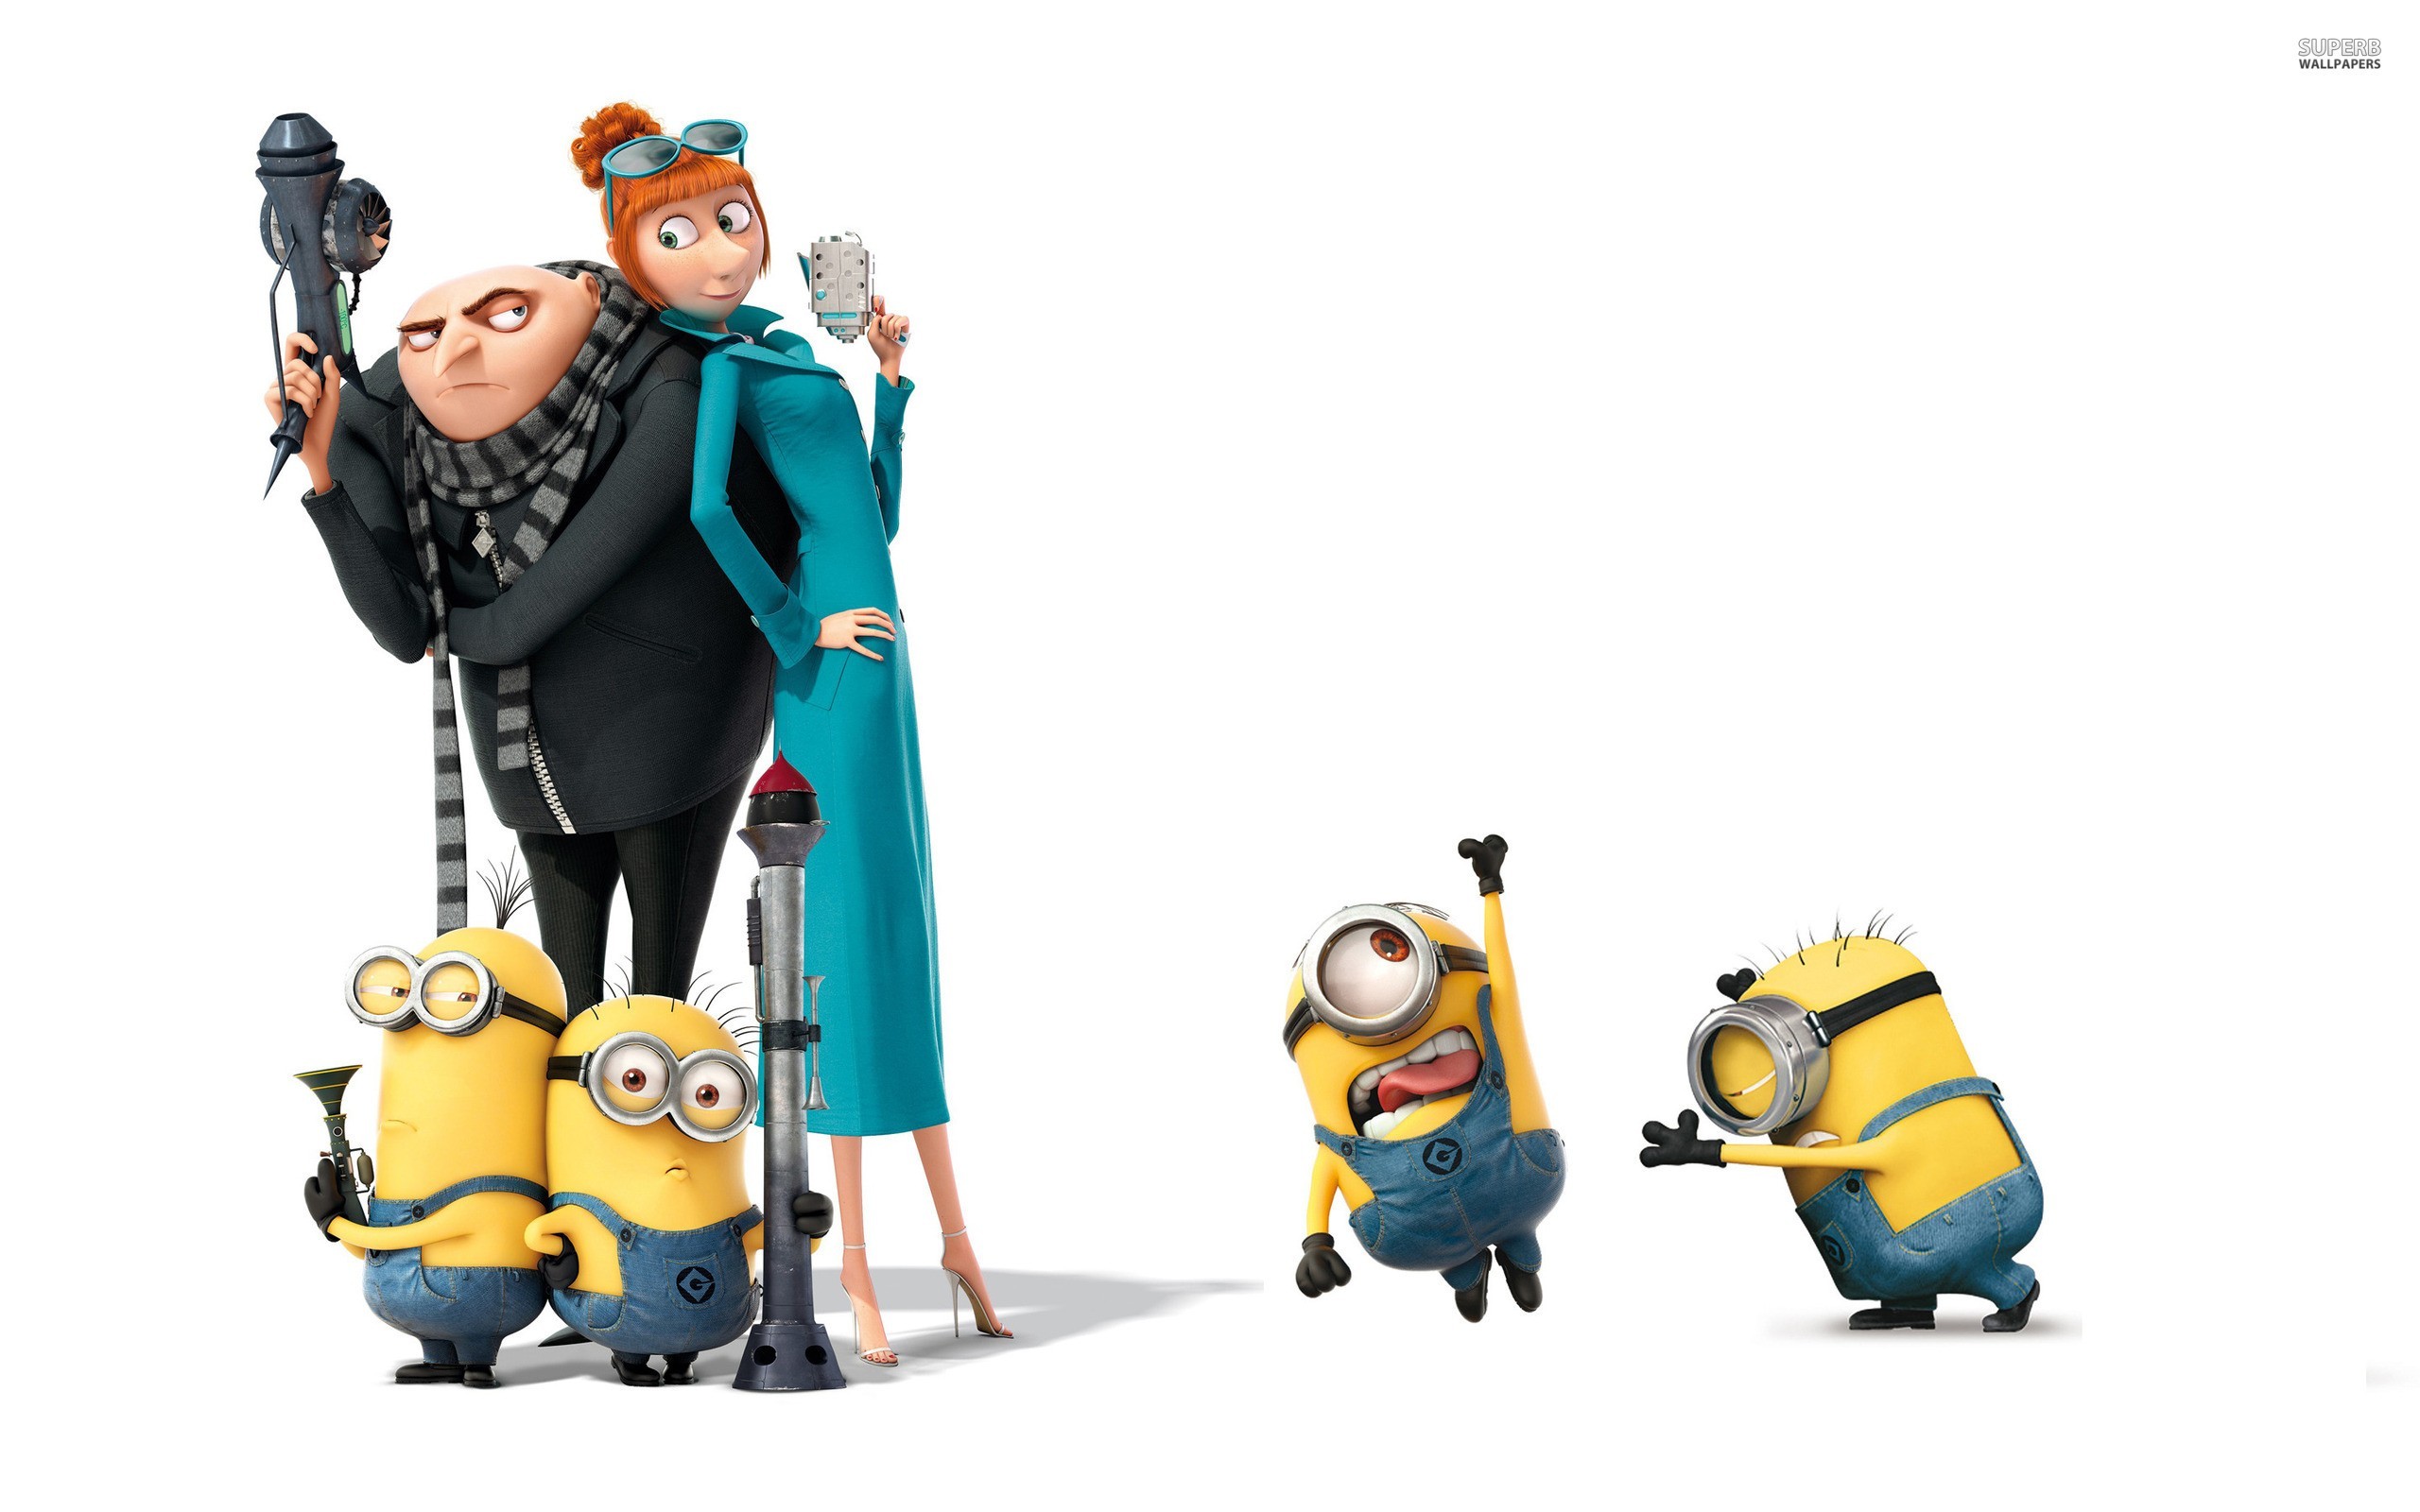 Minions animated movie series glasses and fussy minions 4K wallpaper  download